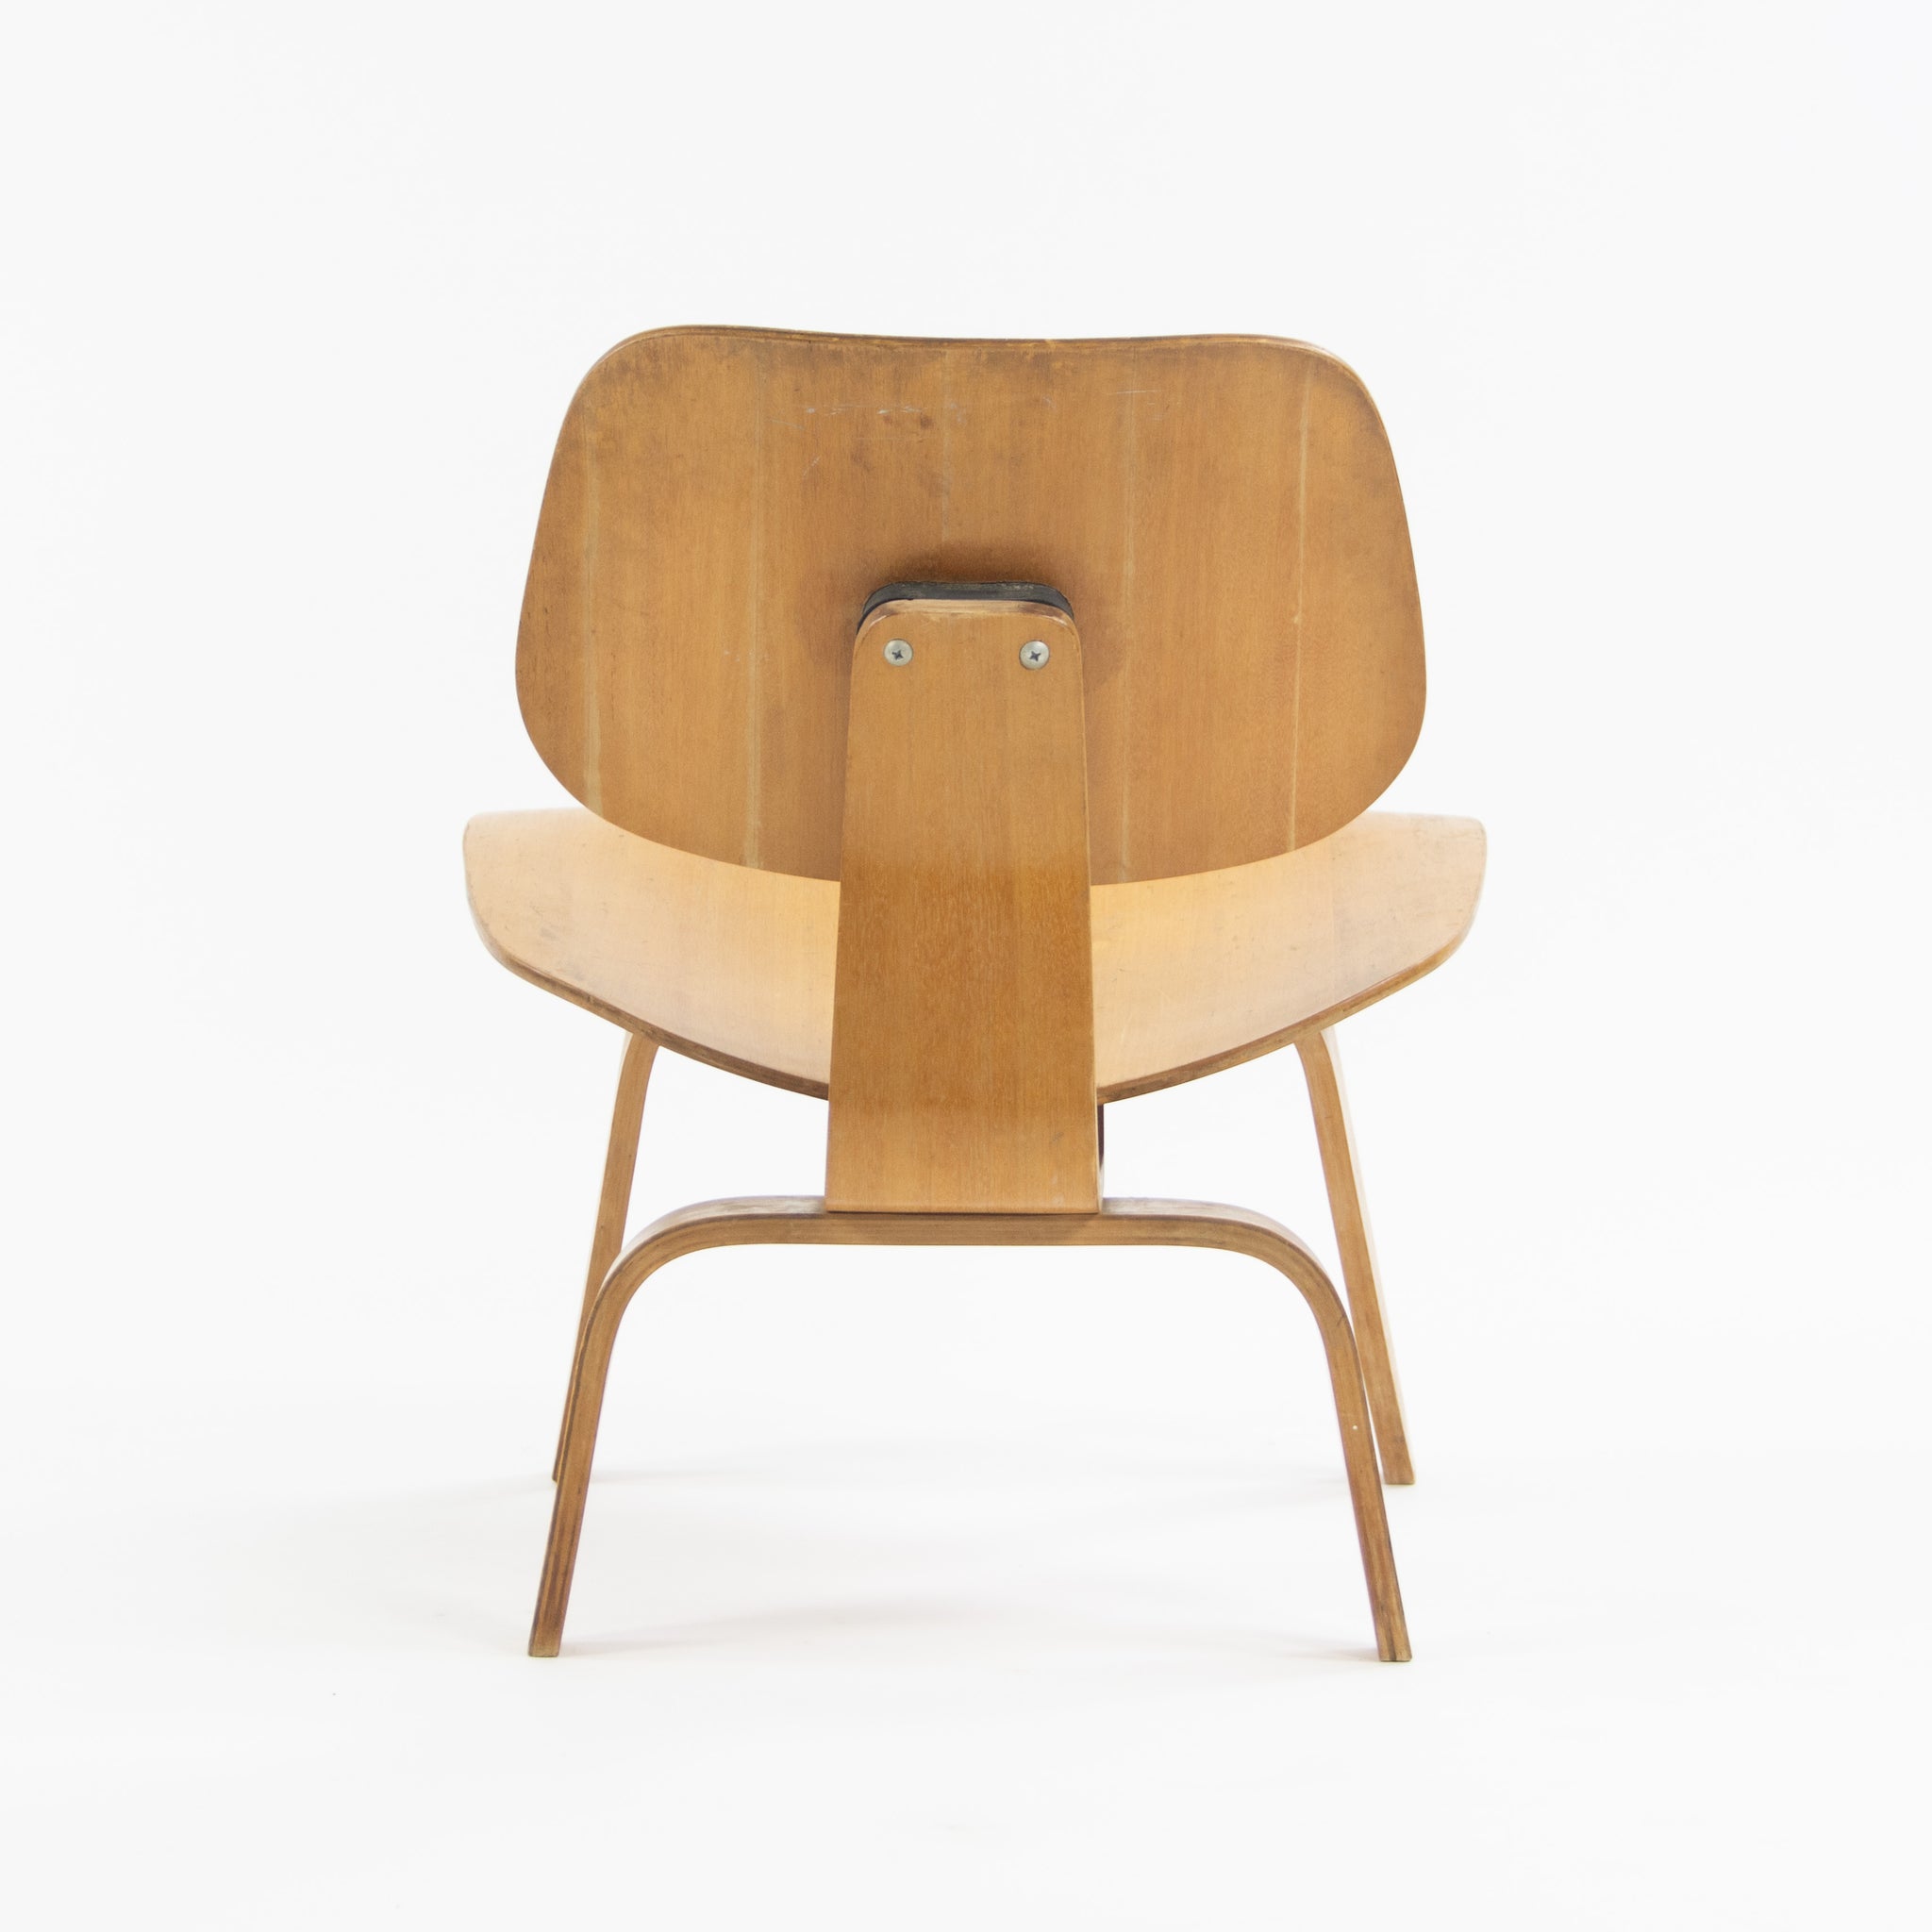 SOLD 1946 Charles and Ray Eames Evans Herman Miller LCW Lounge Chair Wood Ash